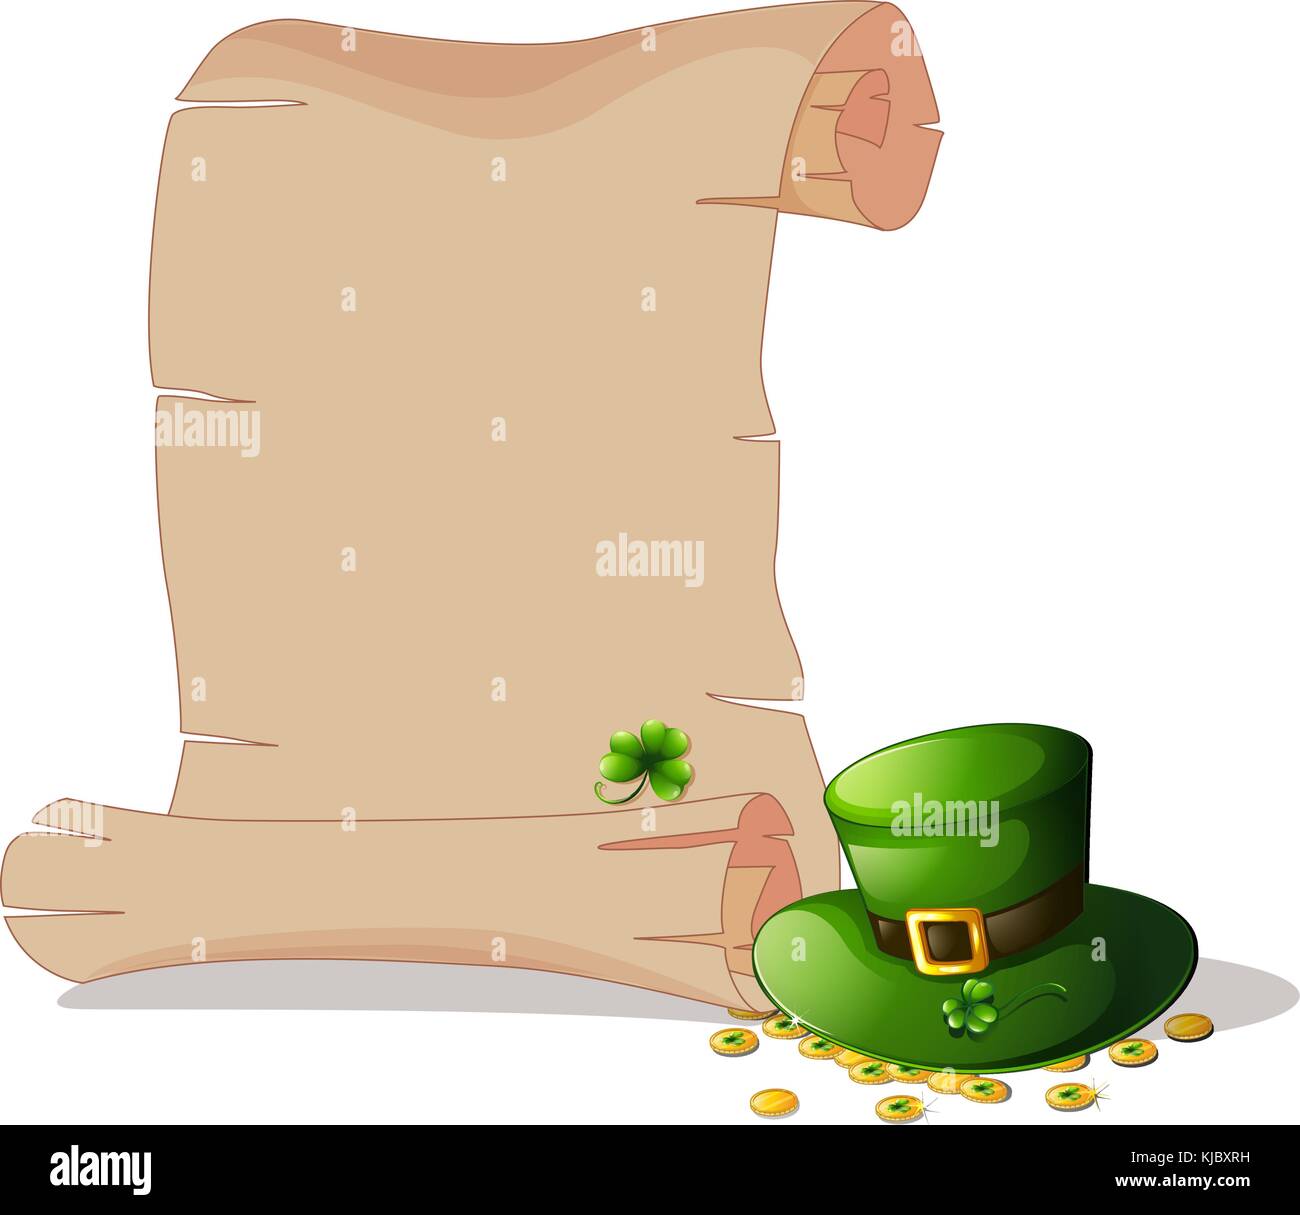 Illustration of an empty space beside a green hat and tokens on a white background Stock Vector